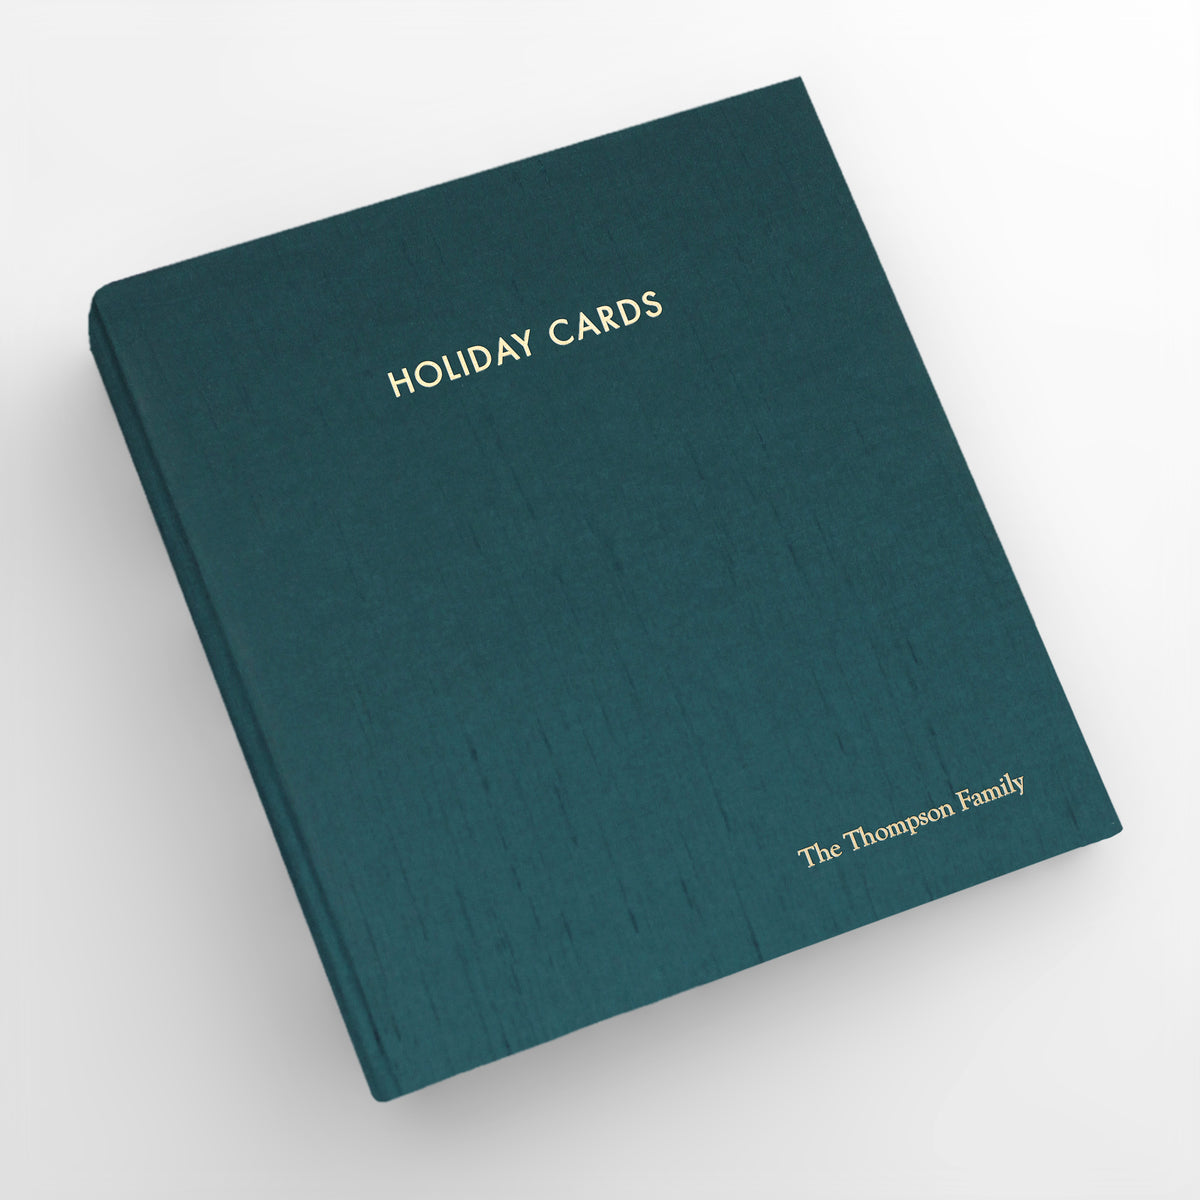 Holiday Card Album | Cover: Teal Blue Silk | Embossed with “Holiday Cards” | Available Personalized